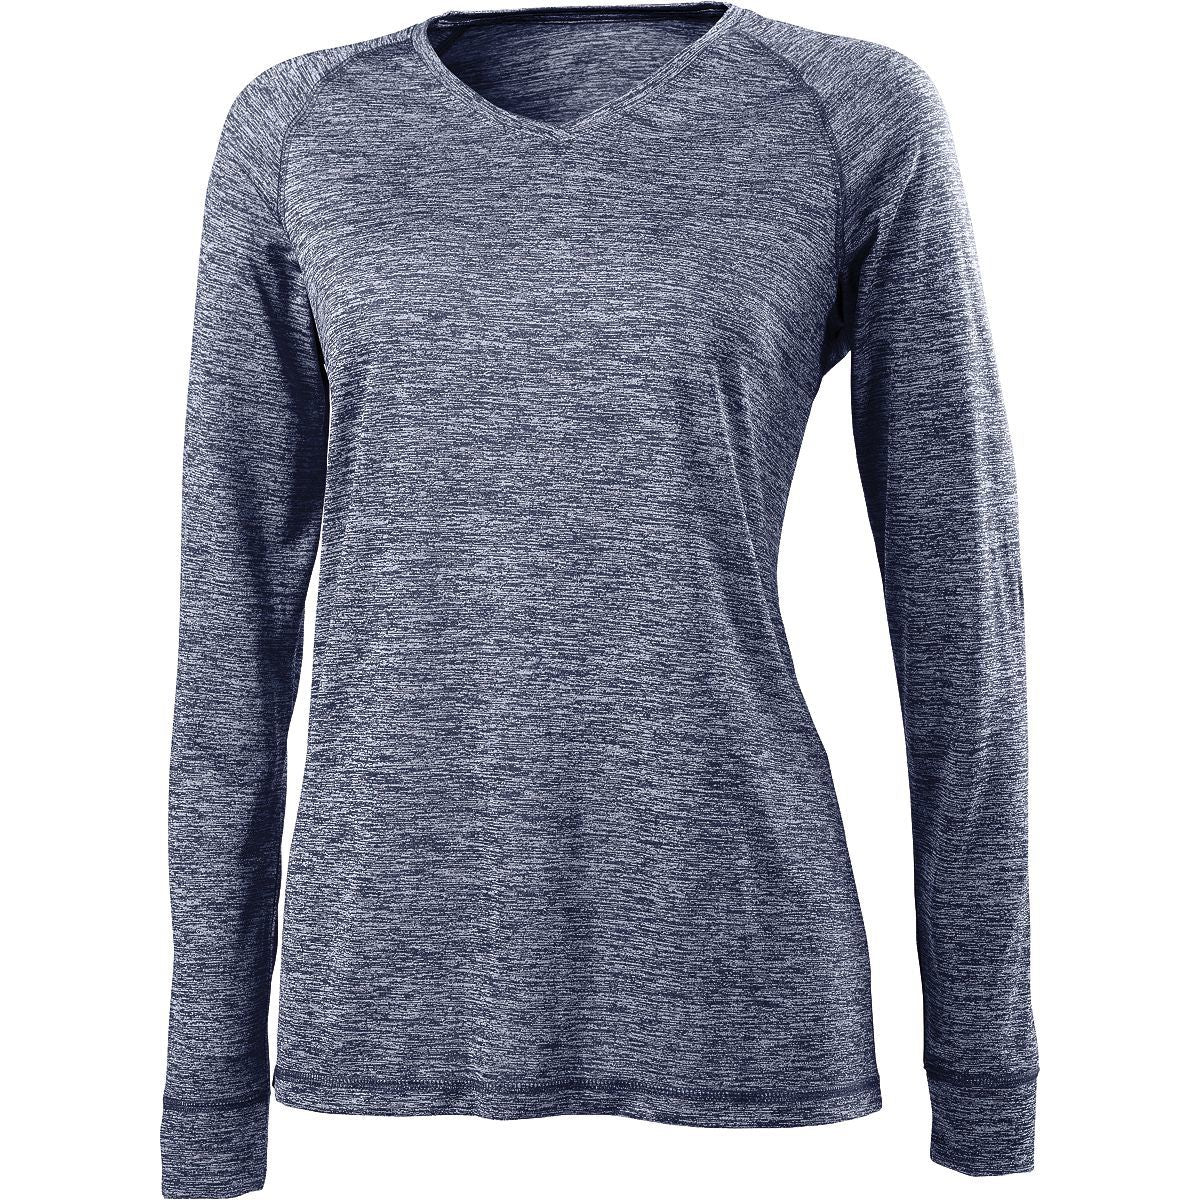 Holloway Ladies Electrify 2.0 V-Neck Long Sleeve Shirt in Navy Heather  -Part of the Ladies, Holloway, Shirts product lines at KanaleyCreations.com